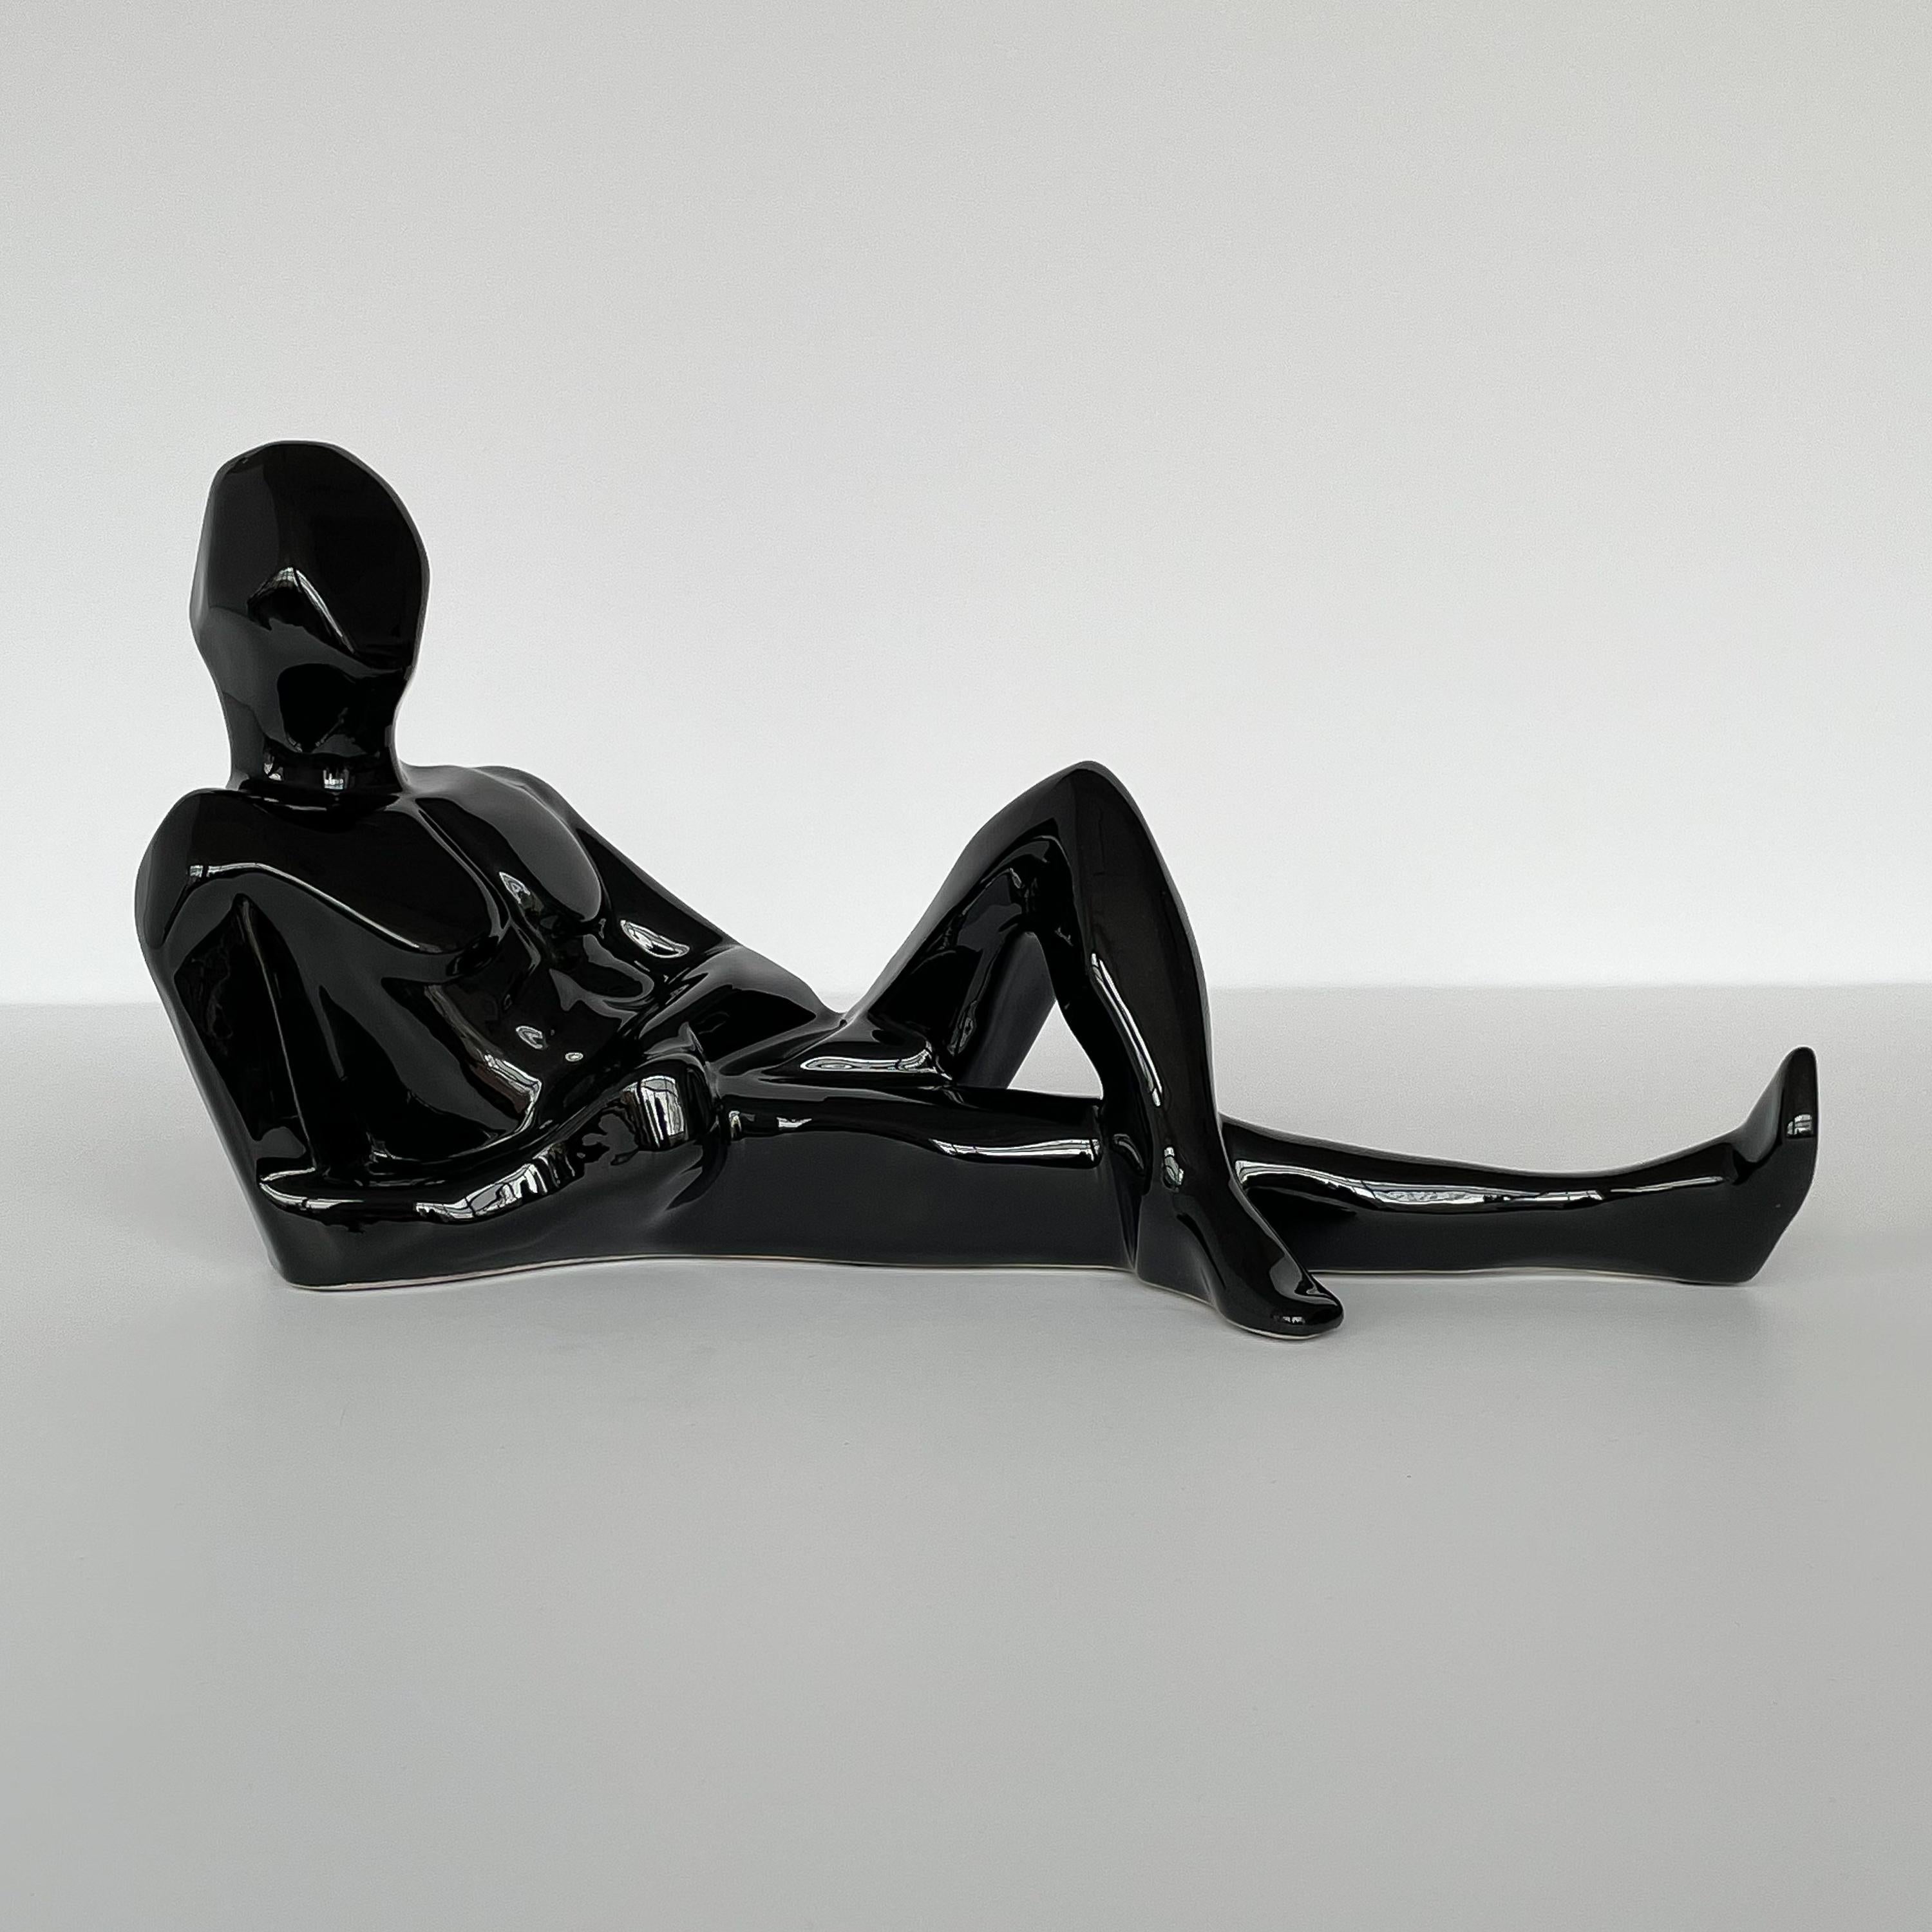 A modernist black glazed figurative ceramic male nude sculpture by Jaru of California, circa 1977. The sculpture depicts a reclining man in repose in an abstract form with a nod to Cubism. Signed and dated 